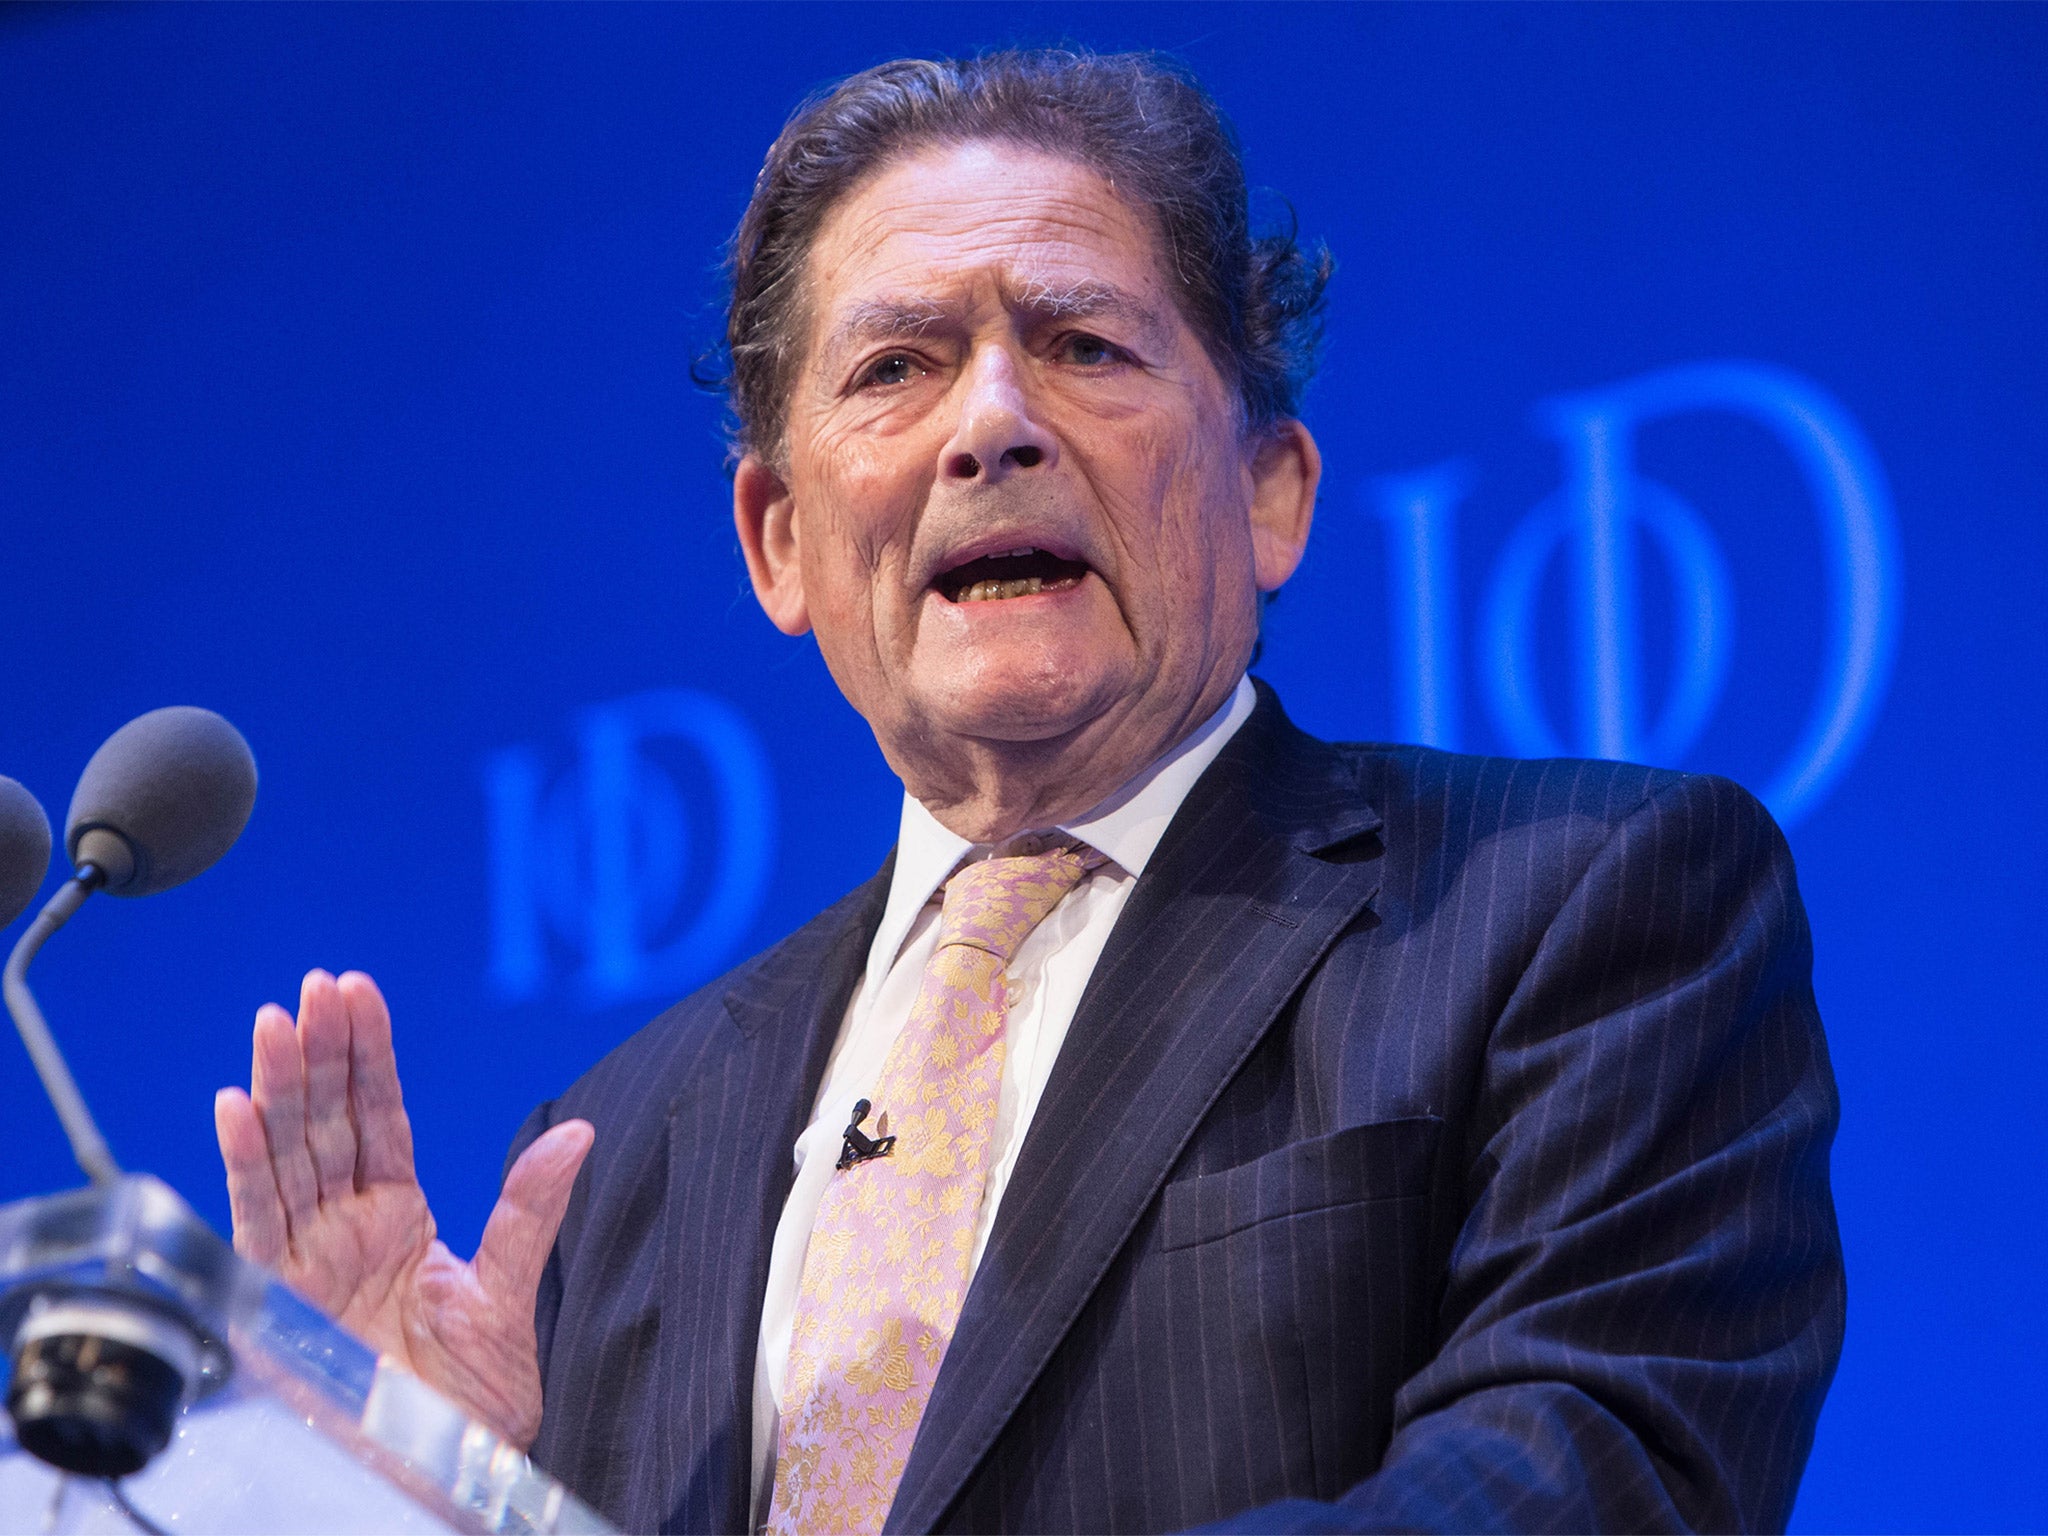 Lord Lawson said the foundation’s peer review process was superior to that of many journals